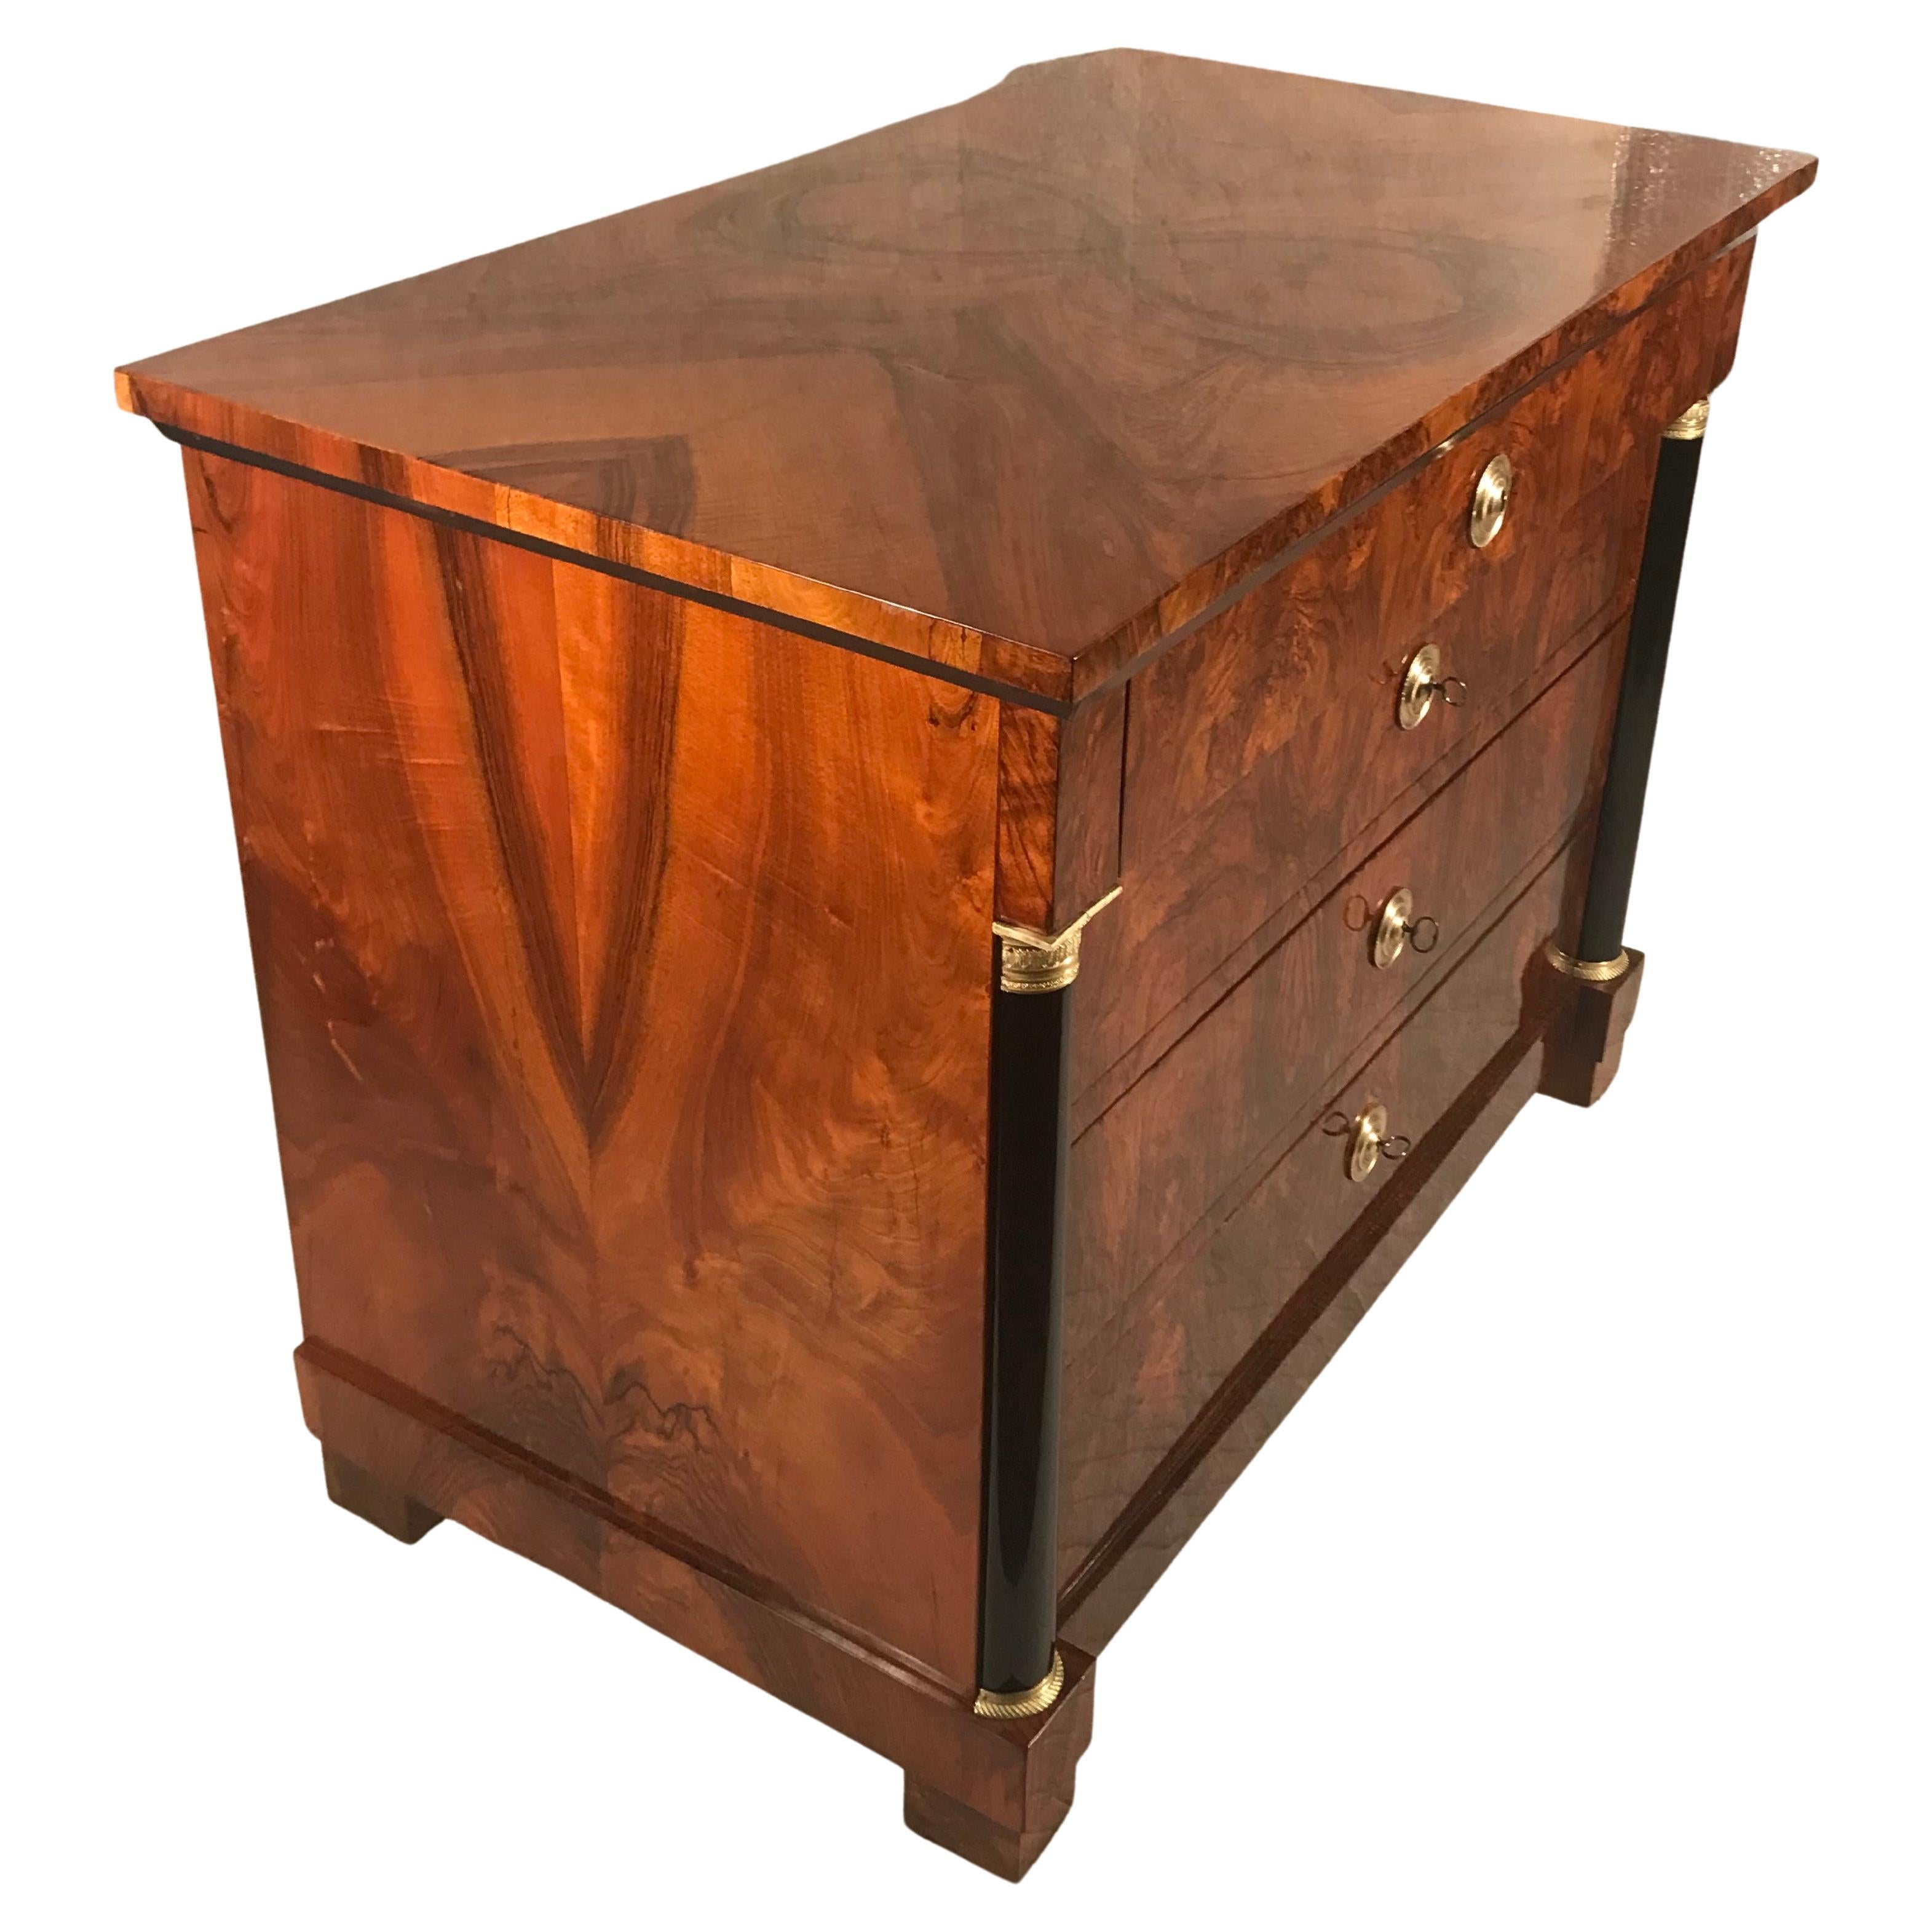 This original Biedermeier chest of drawers dates back to 1820 and was made in Southern Germany. The four drawer commode has a gorgeous walnut veneer. The uppermost drawer is slightly protruding and the three lower drawers are flanked by two ebonized